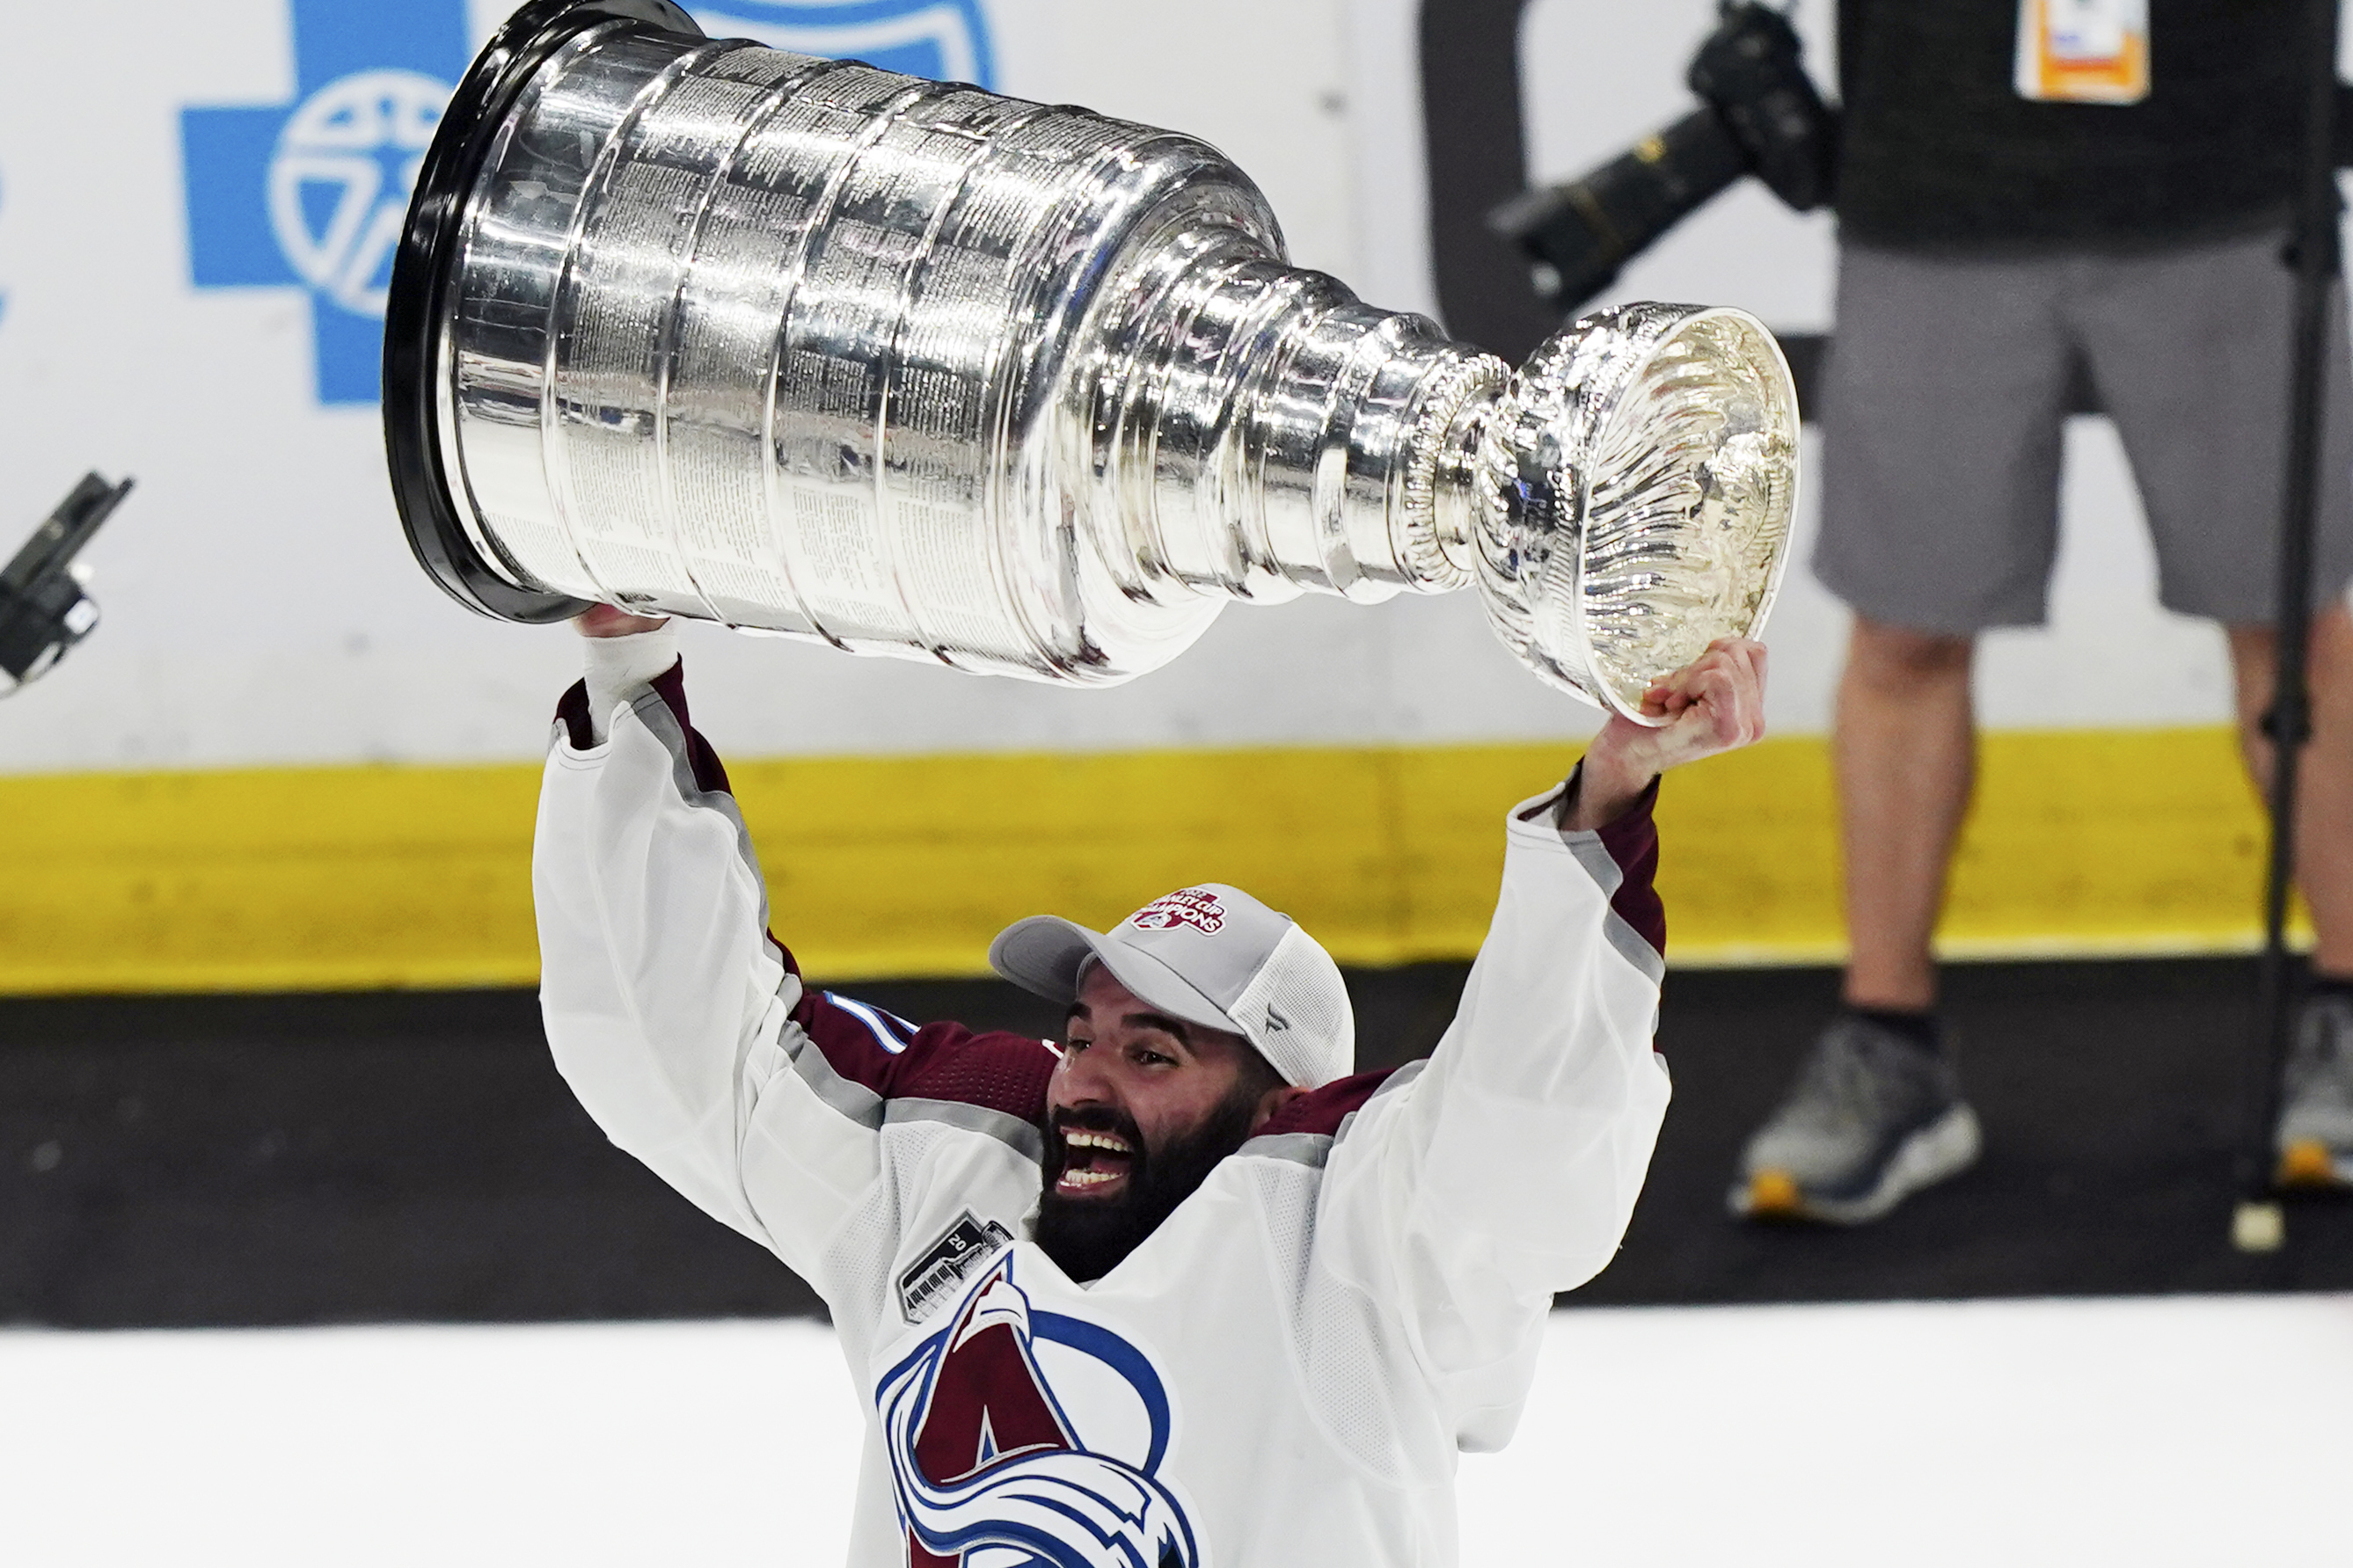 List: 8 times Stanley Cup celebrations resulted in dented, damaged